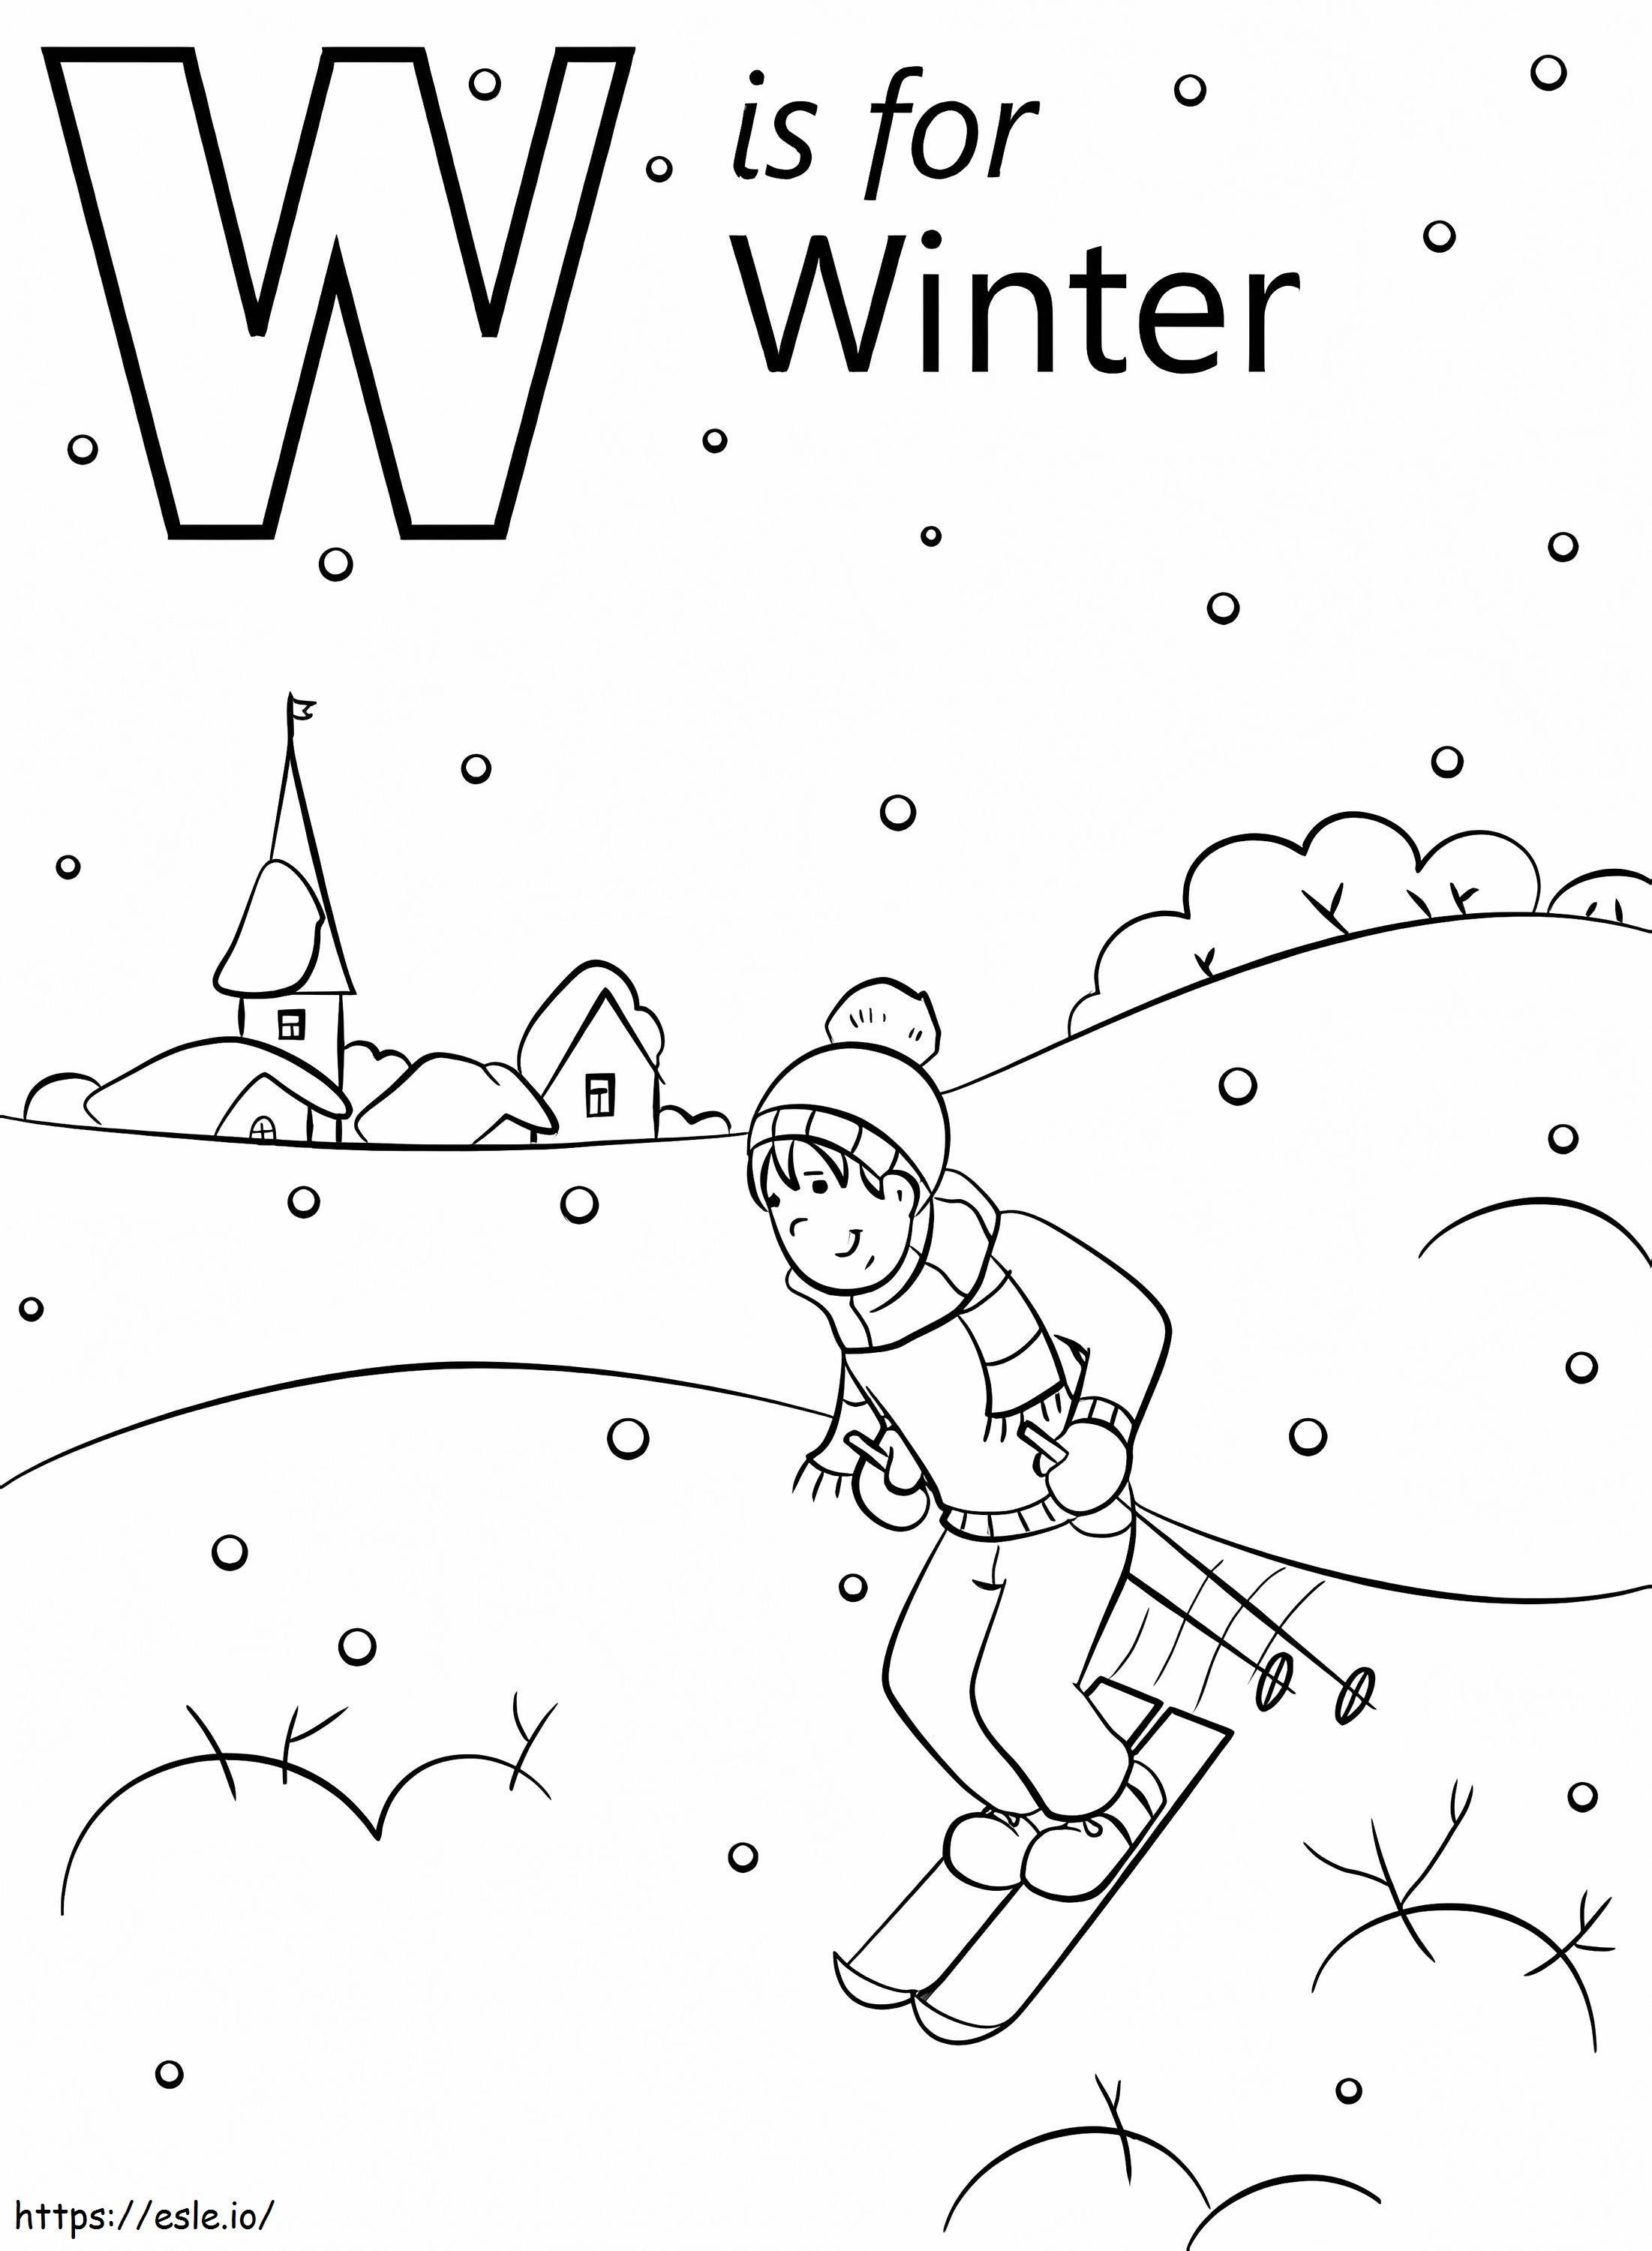 Winter Letter W coloring page